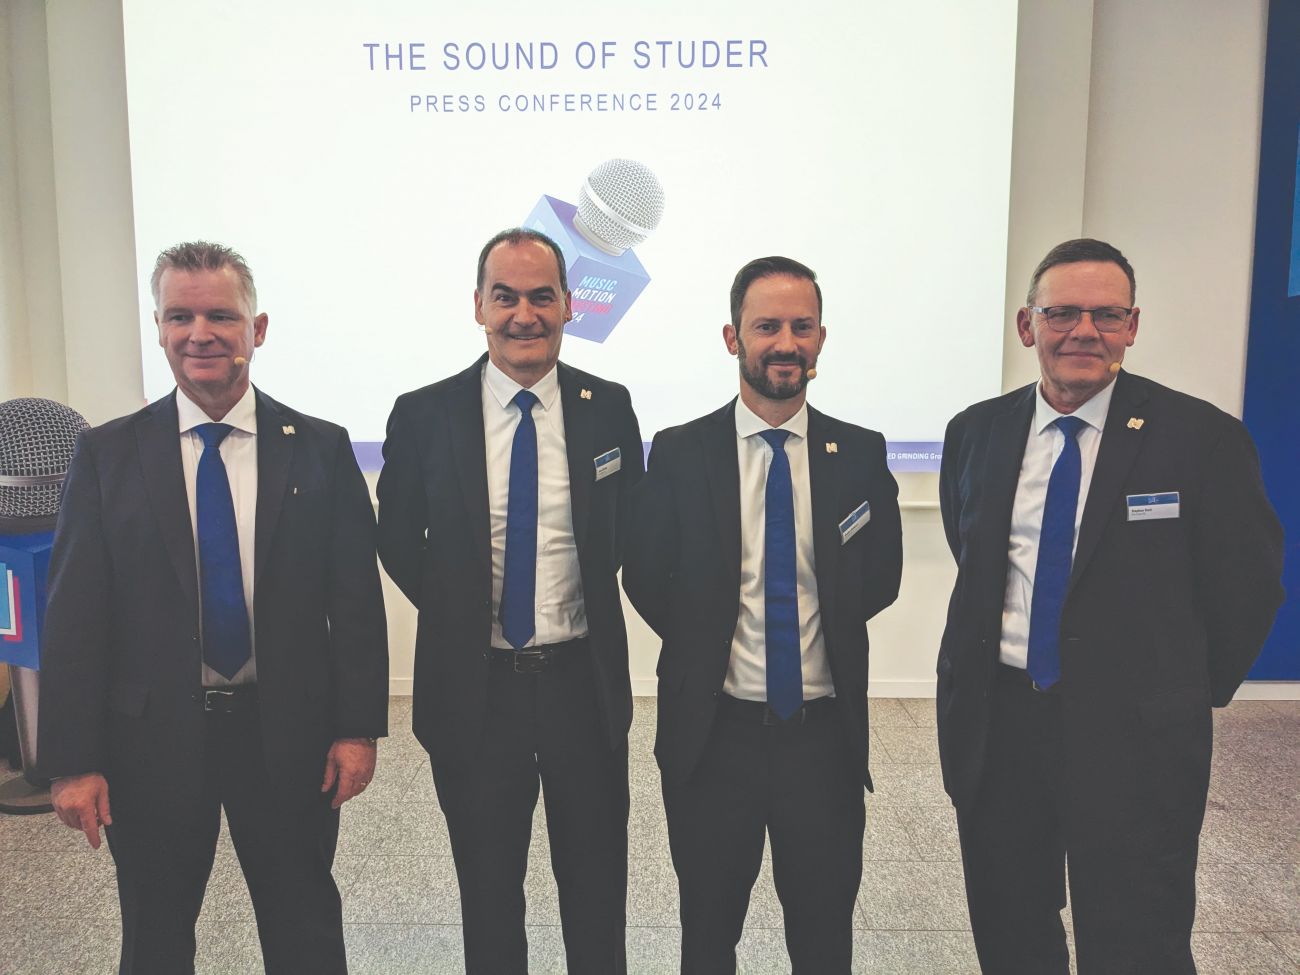 L-R: Daniel Huber, CTO; Jens Bleher, CEO; Sandro Bottazzo, CSO; and Stephan Stoll, COO, Fritz Studer AG during the Motion Meeting 2024 in Thun.